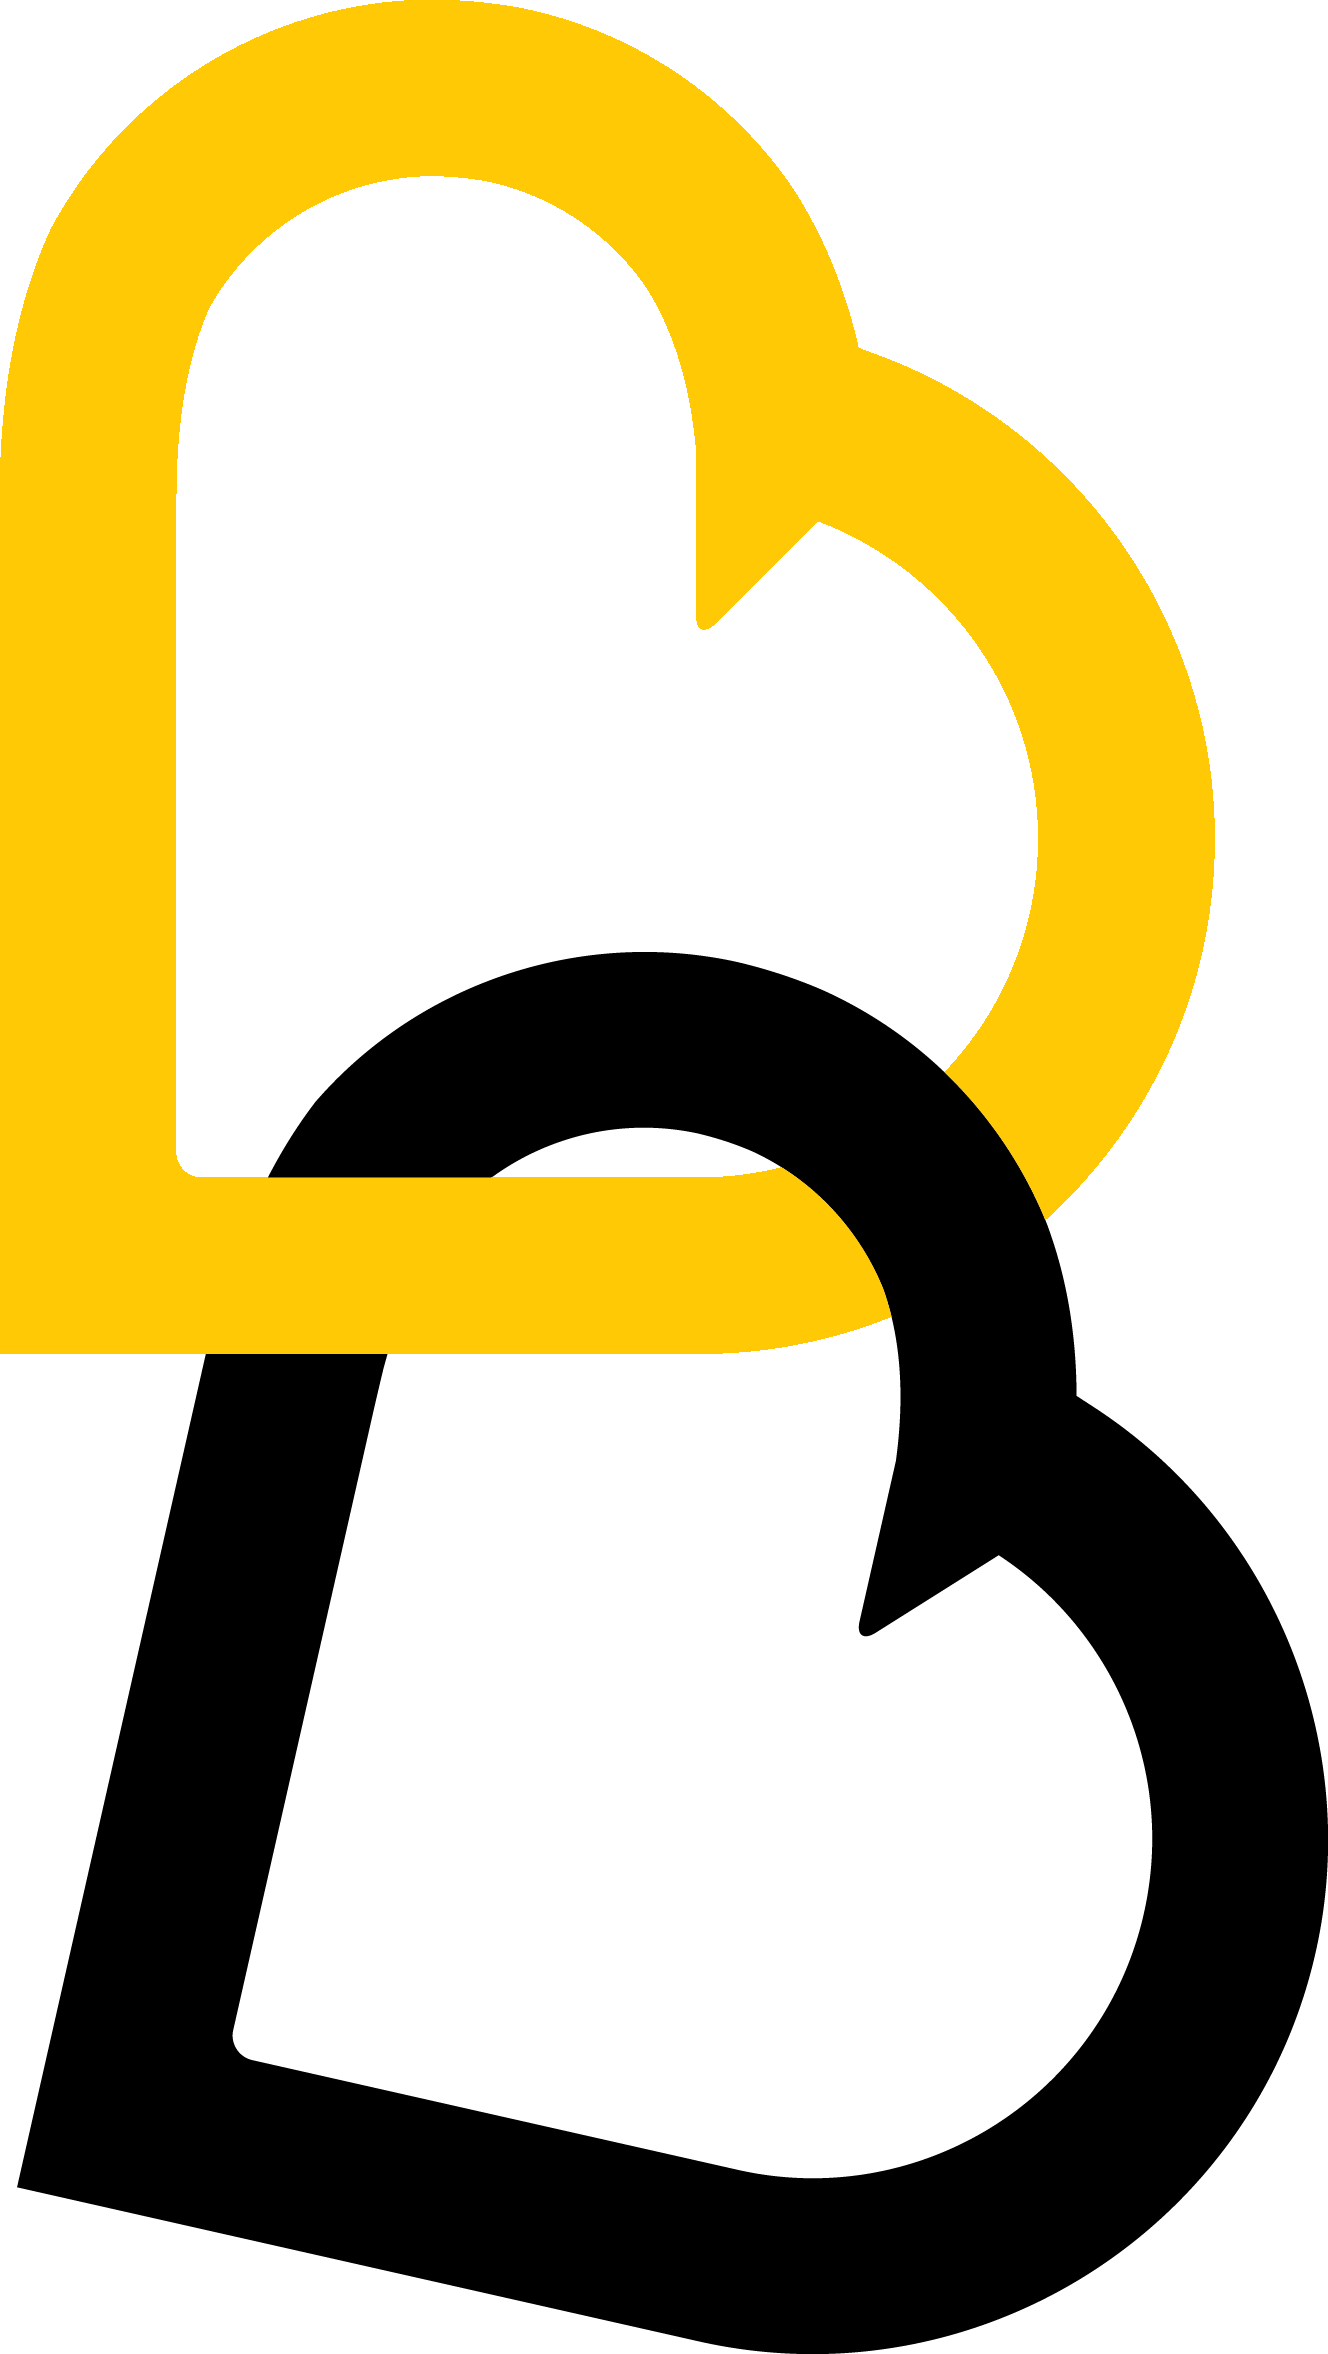 Tribute Funds - Beatson Cancer Charity Logo (1328x2354)